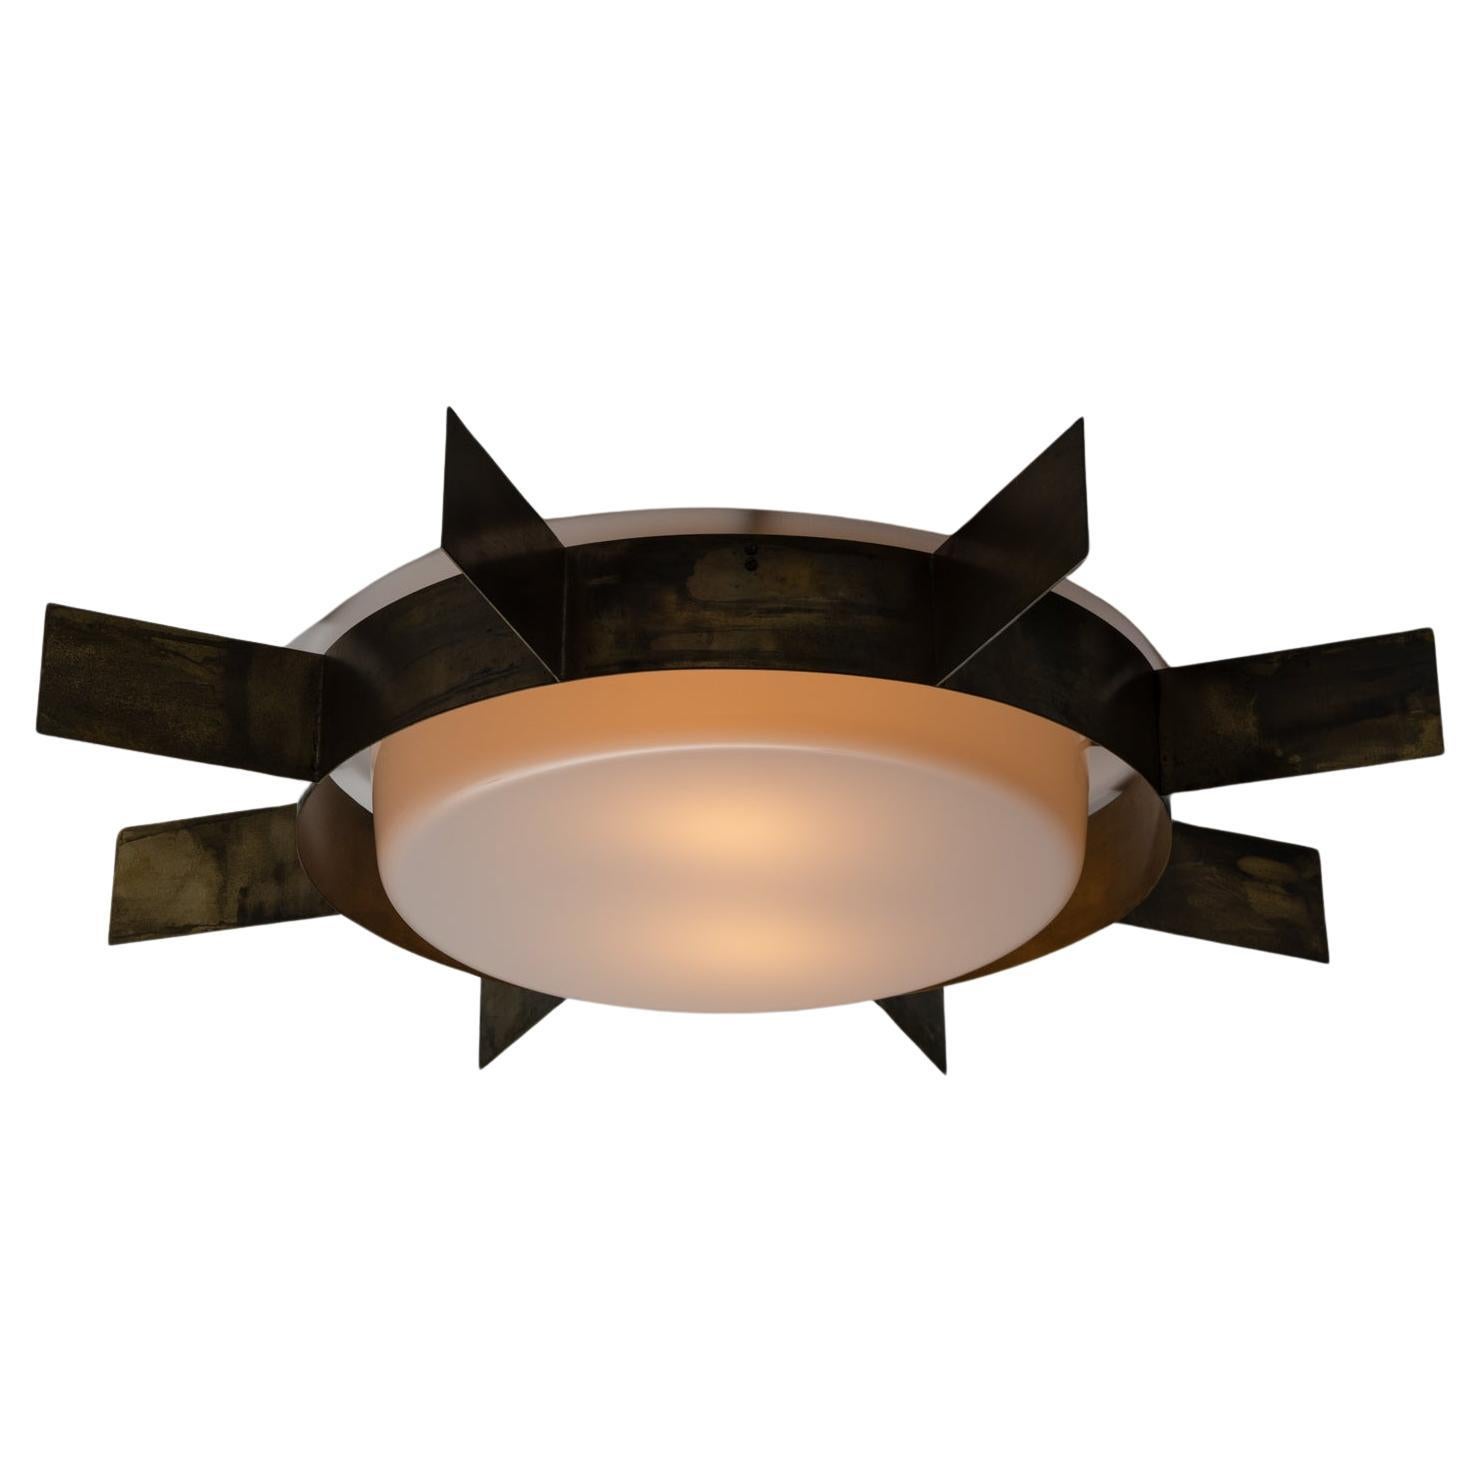 Single 'Sole' Flush Mount by Gio Ponti for Arredoluce For Sale